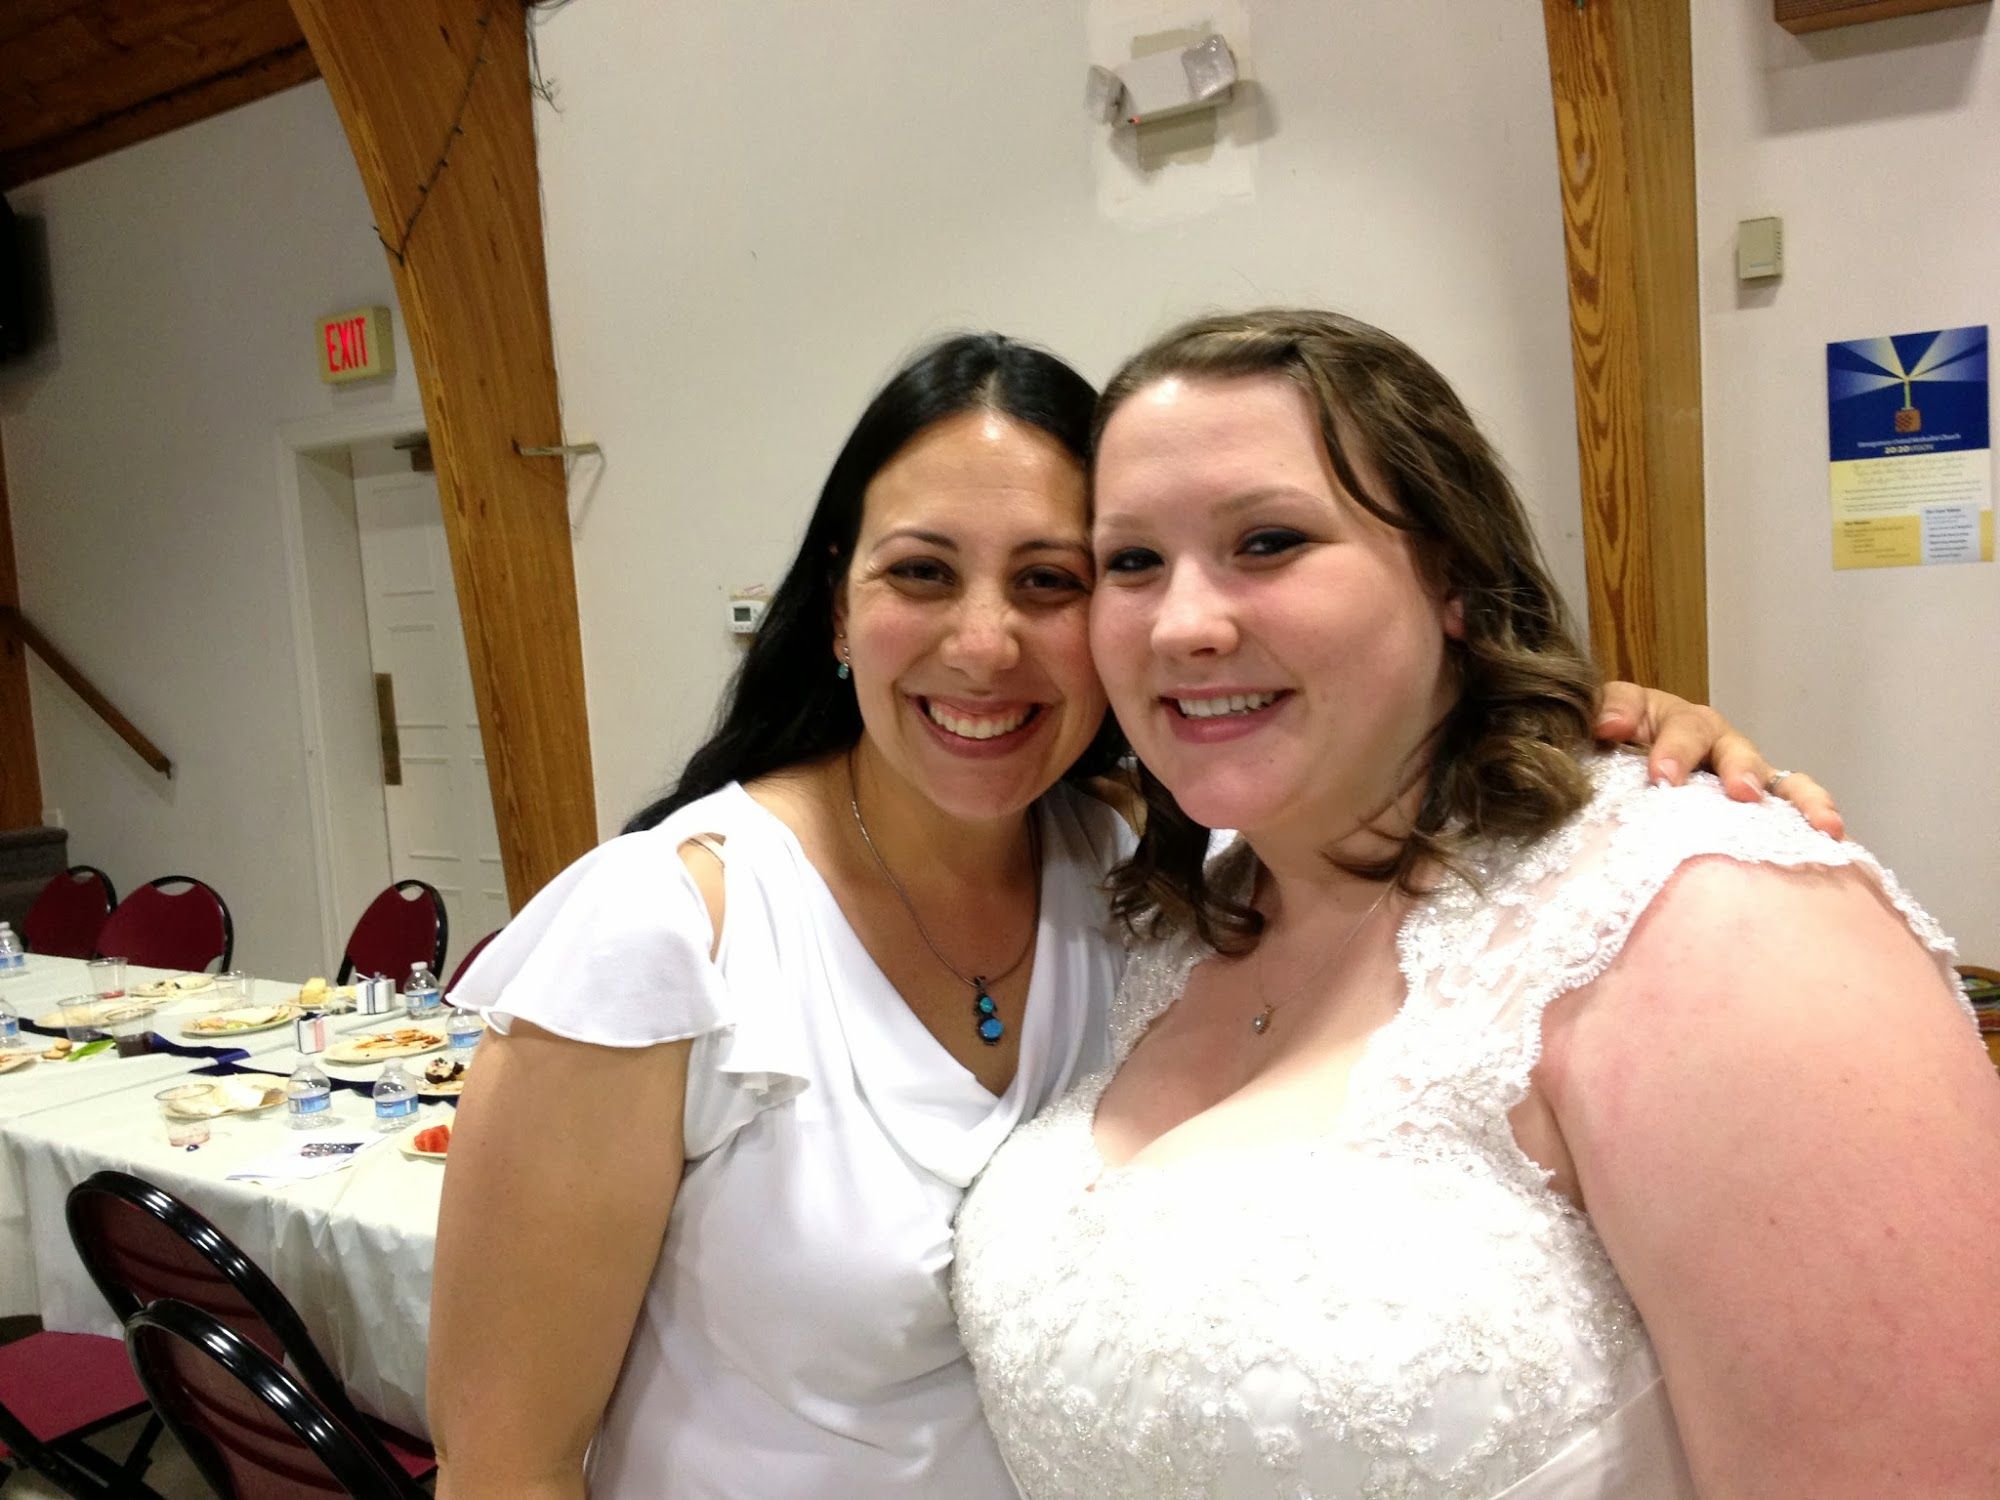  The Bride and I at her wedding reception 